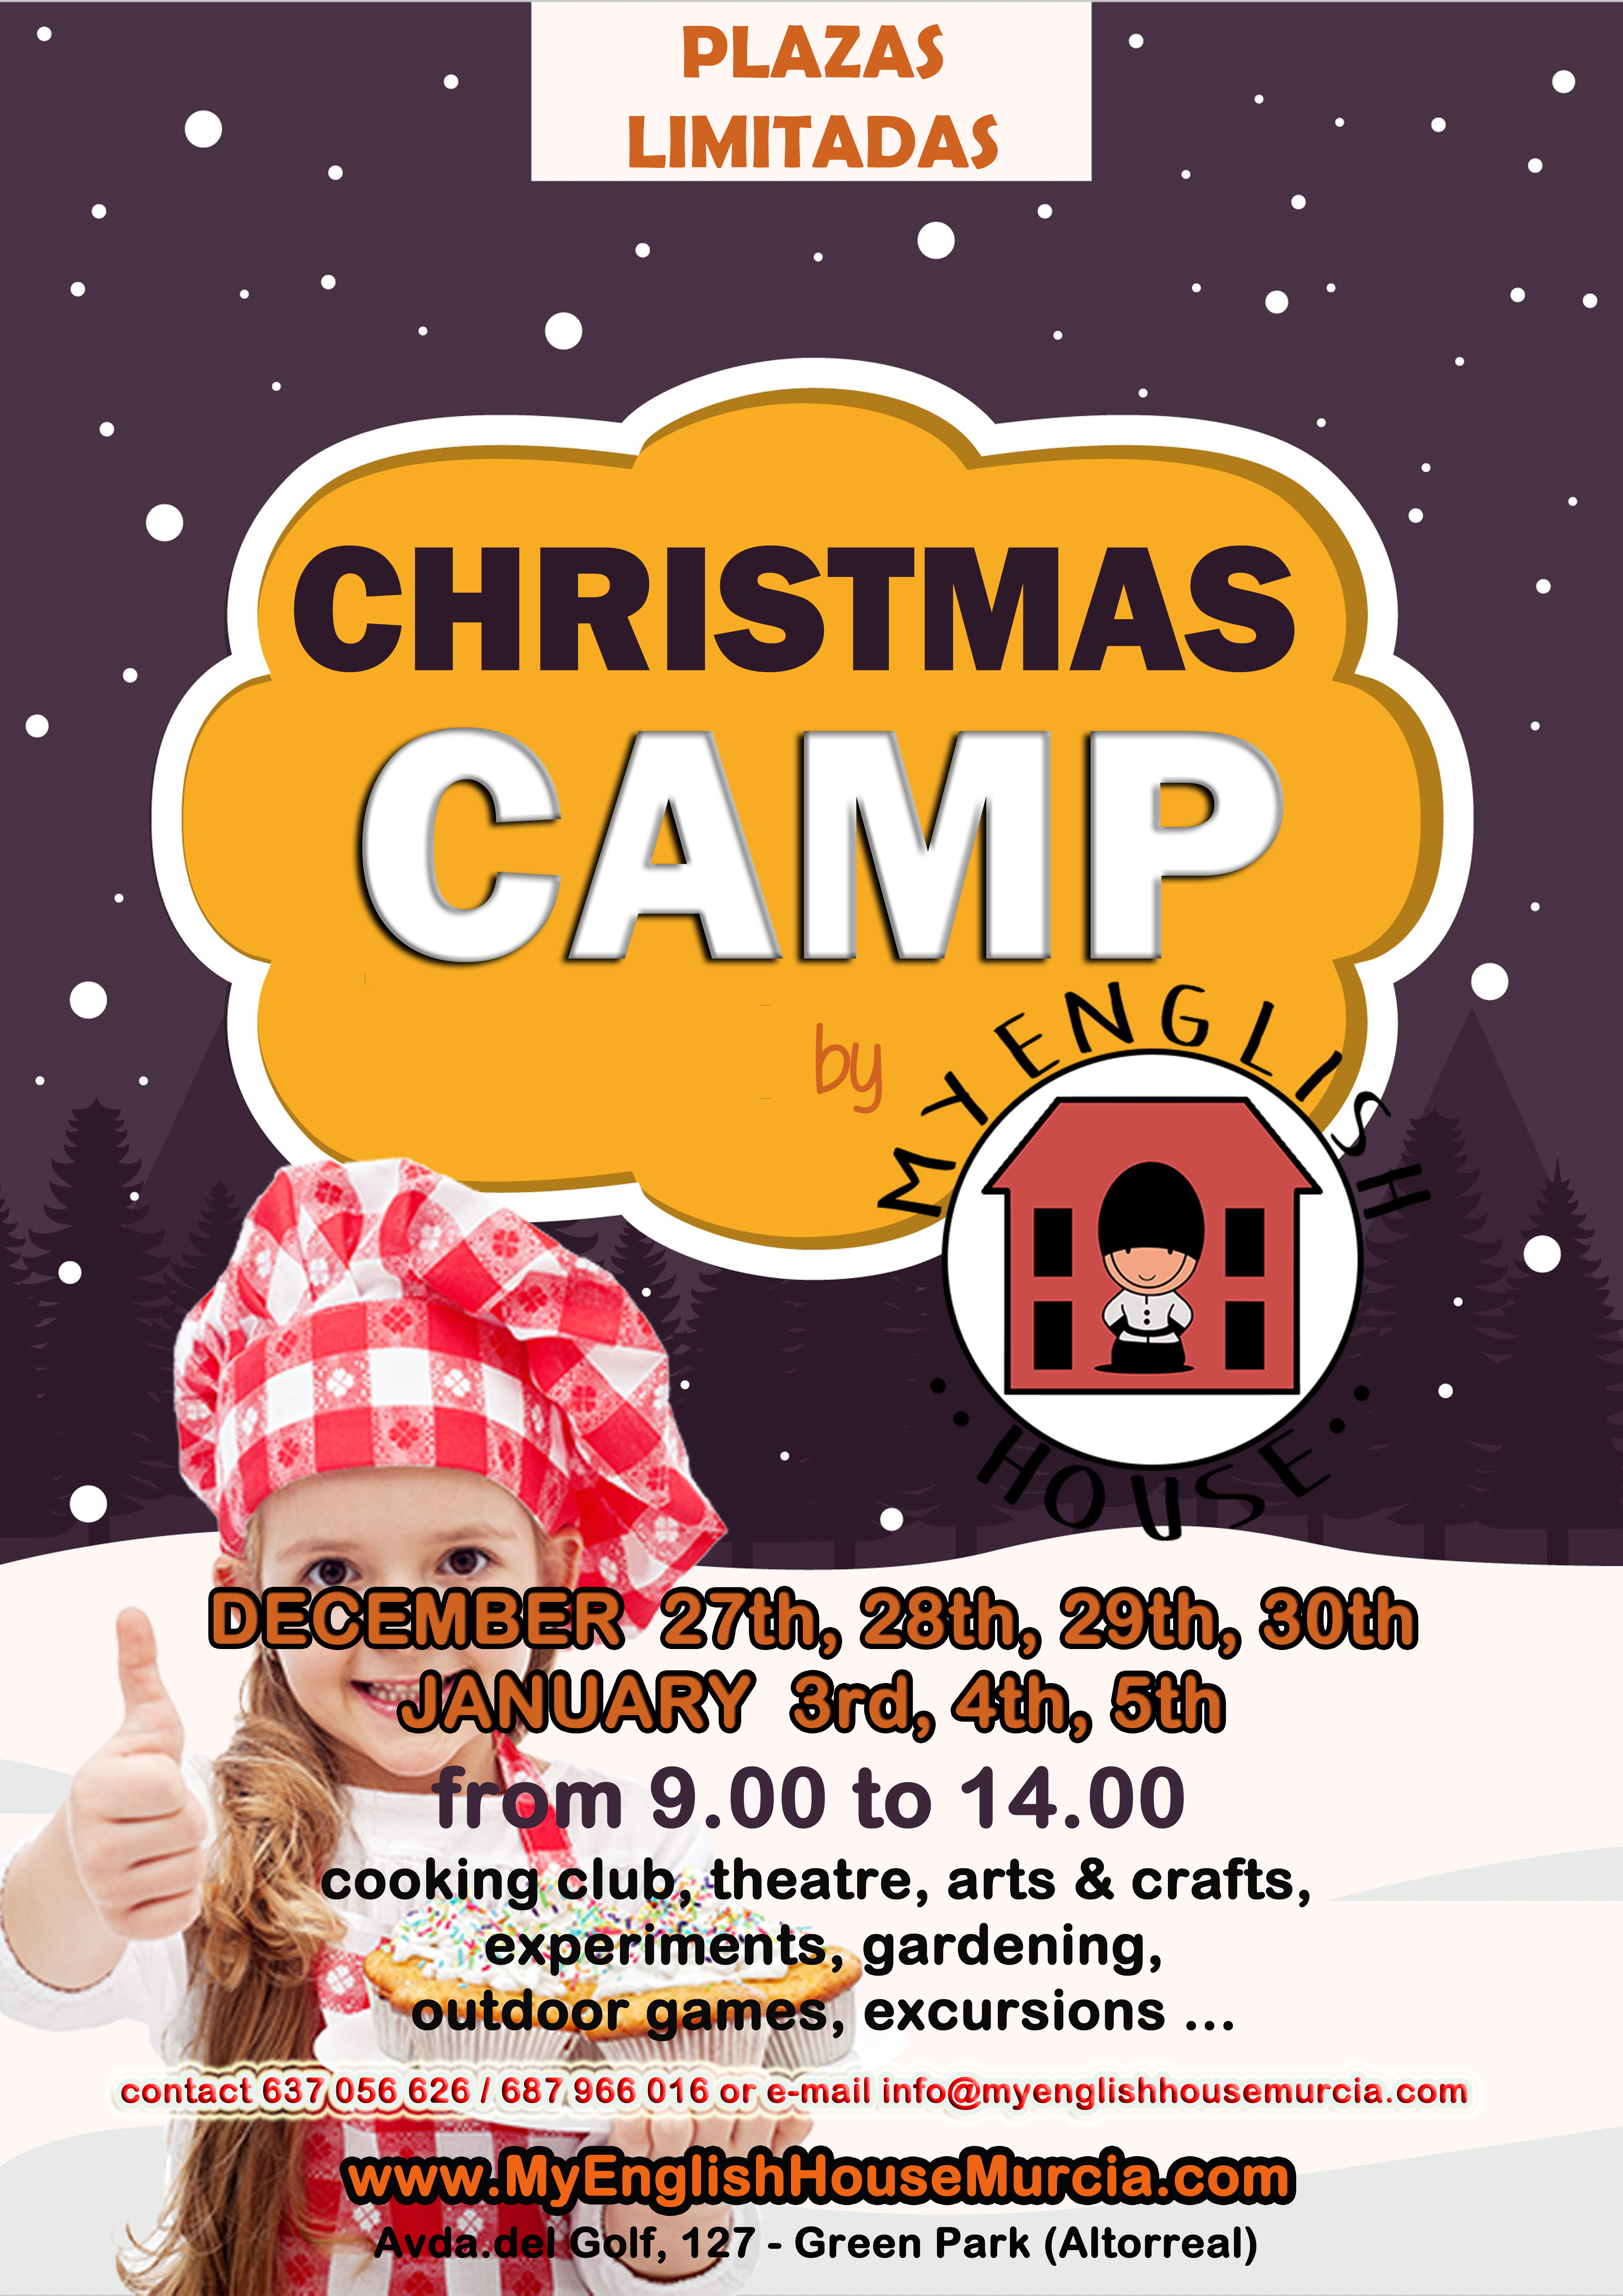 Are You Ready For The Best Christmas Camp!!?